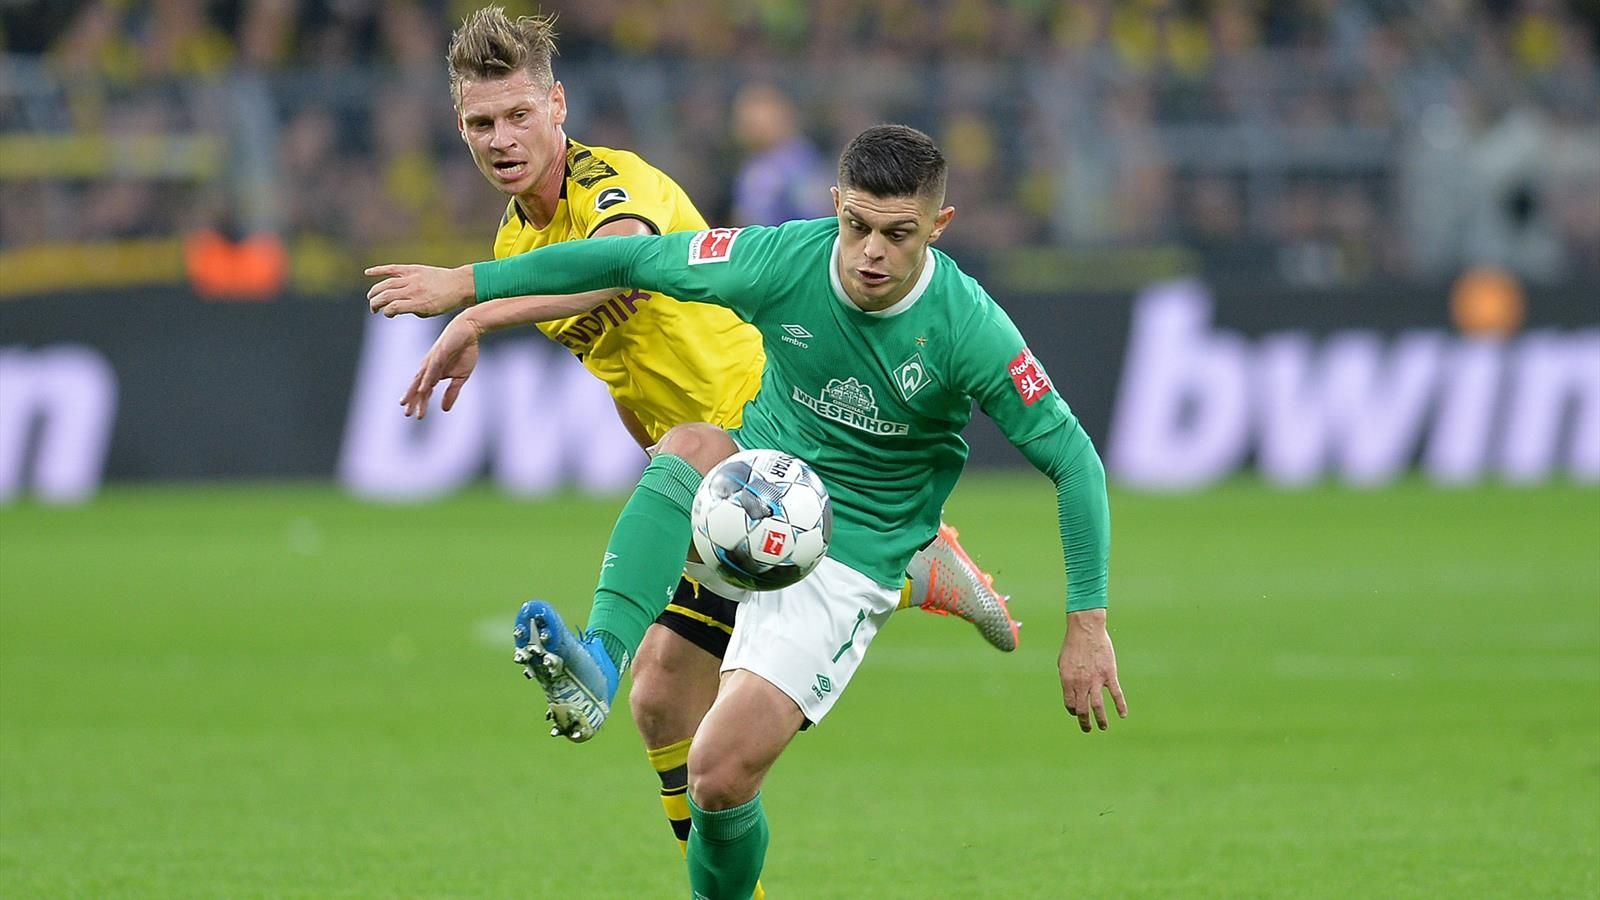 Milan and Napoli in a Race to Acquire Werder Bremen’s Rashica